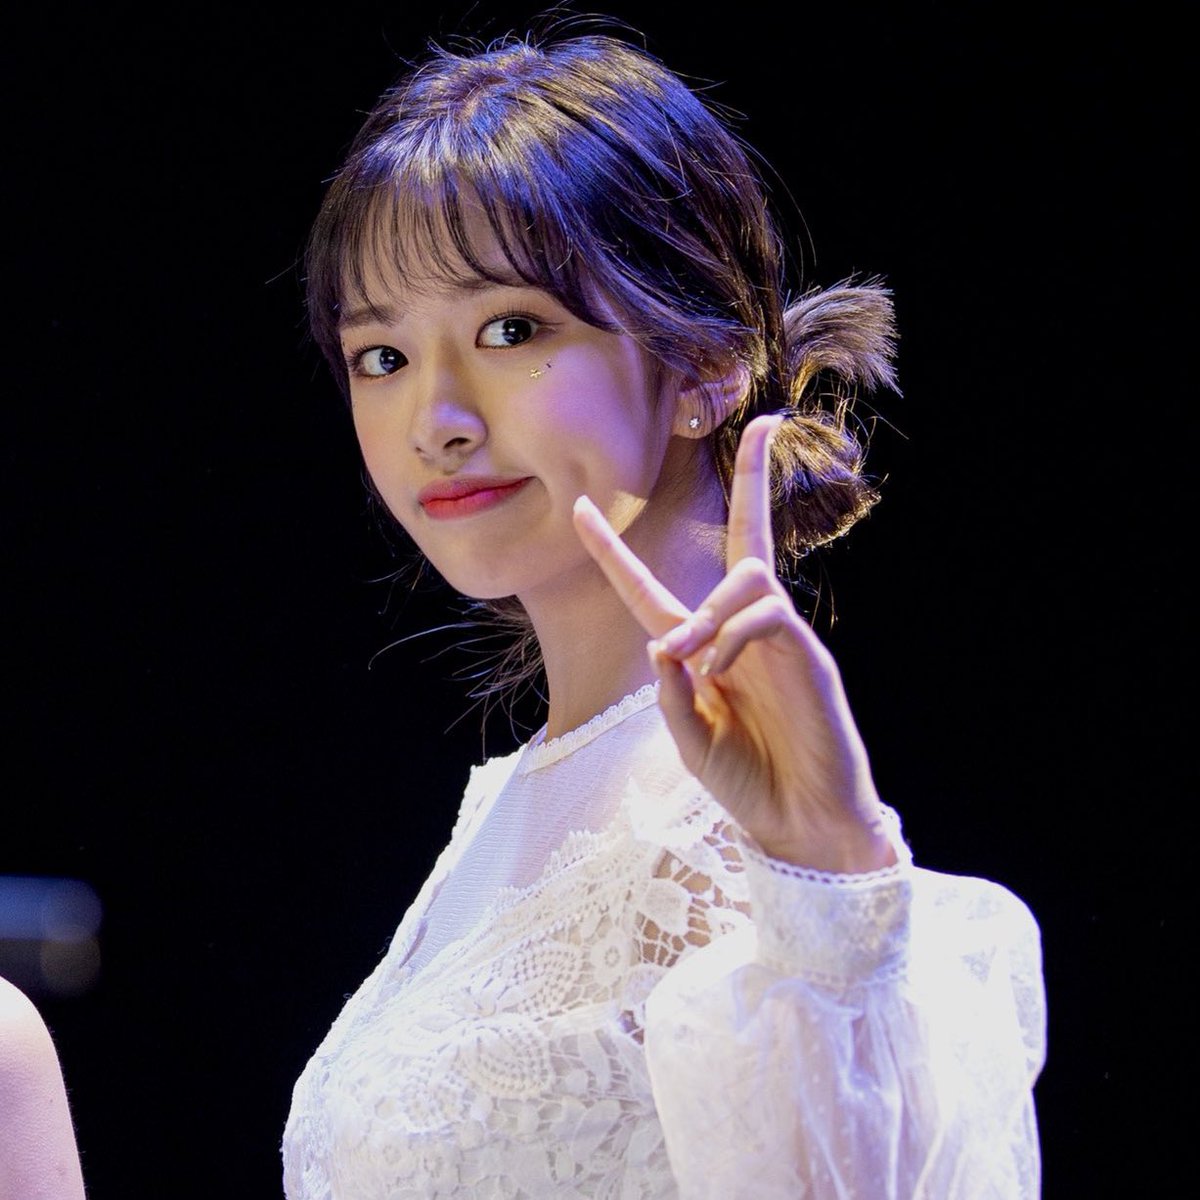 Appreciation thread for Ahn Yujin because she is more than just a young giant all rounder of IZ*ONE.